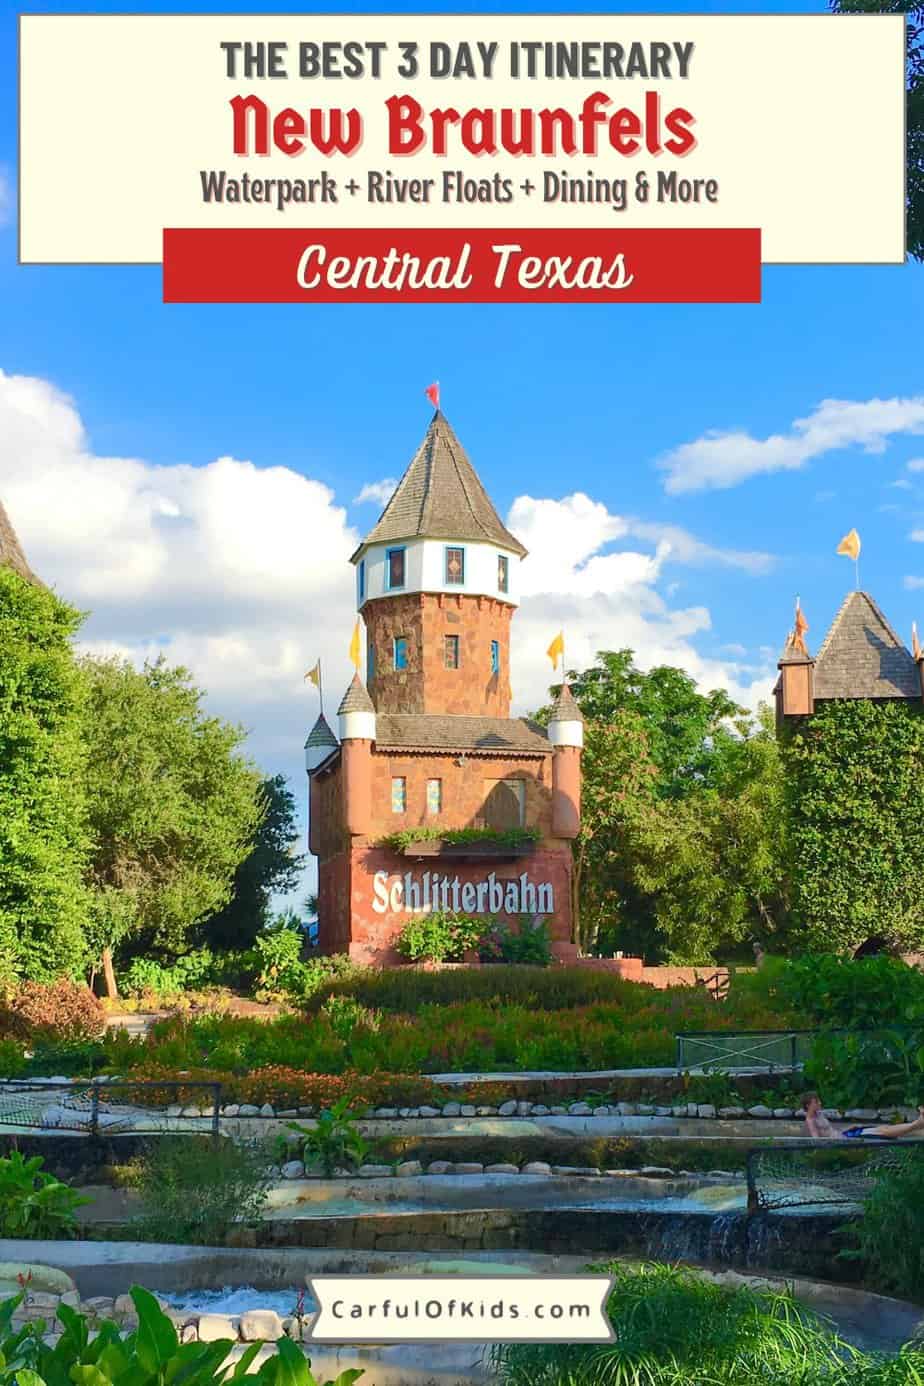 Explore a quaint German town in-between San Antonio and Austin for a long weekend of family fun. Find waterparks and float trips. Get all the details like where to stay, where to eat and what to do when visiting New Braunfels, Texas. Where to go in Central Texas for the weekend | 3 Day Itinerary for New Braunfels #Texas #NewBraunfels 